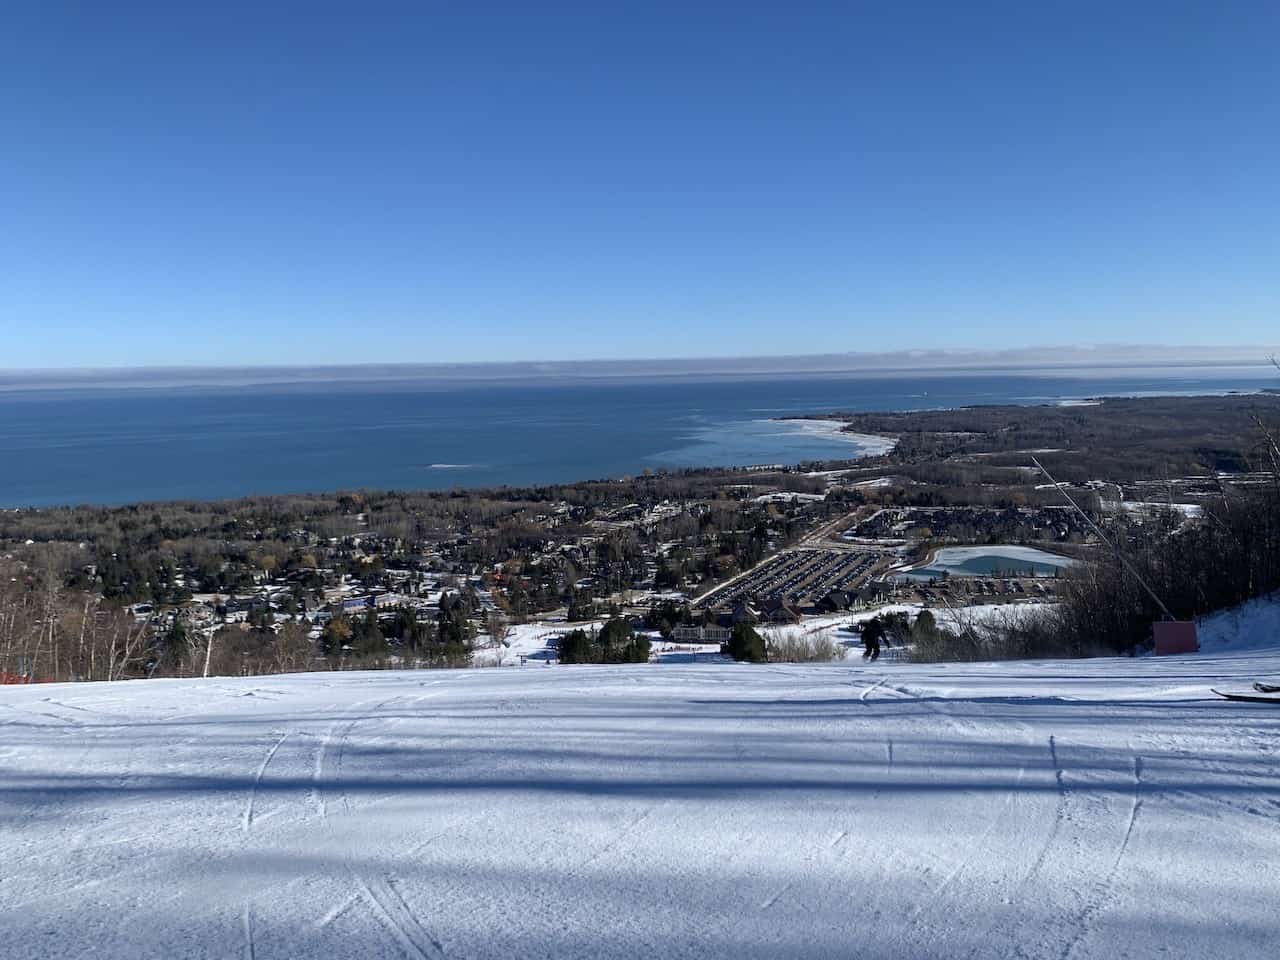 Views of Georgian Bay from Craigleith Ski Club - The Craigleith website boasts of breathtaking views of the escarpment and Georgian Bay. I have to agree, the view was fantastic!